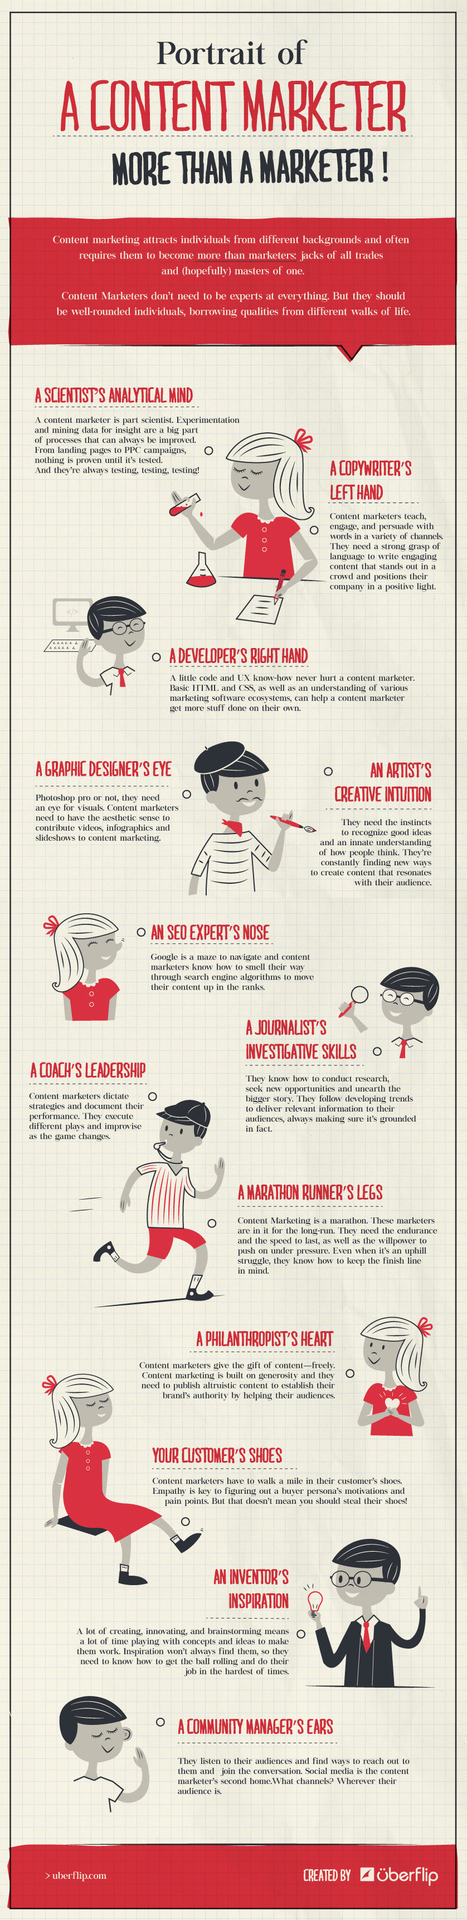 #Infographic: Portrait of a Content Marketer: More Than a Writer | E-Learning-Inclusivo (Mashup) | Scoop.it